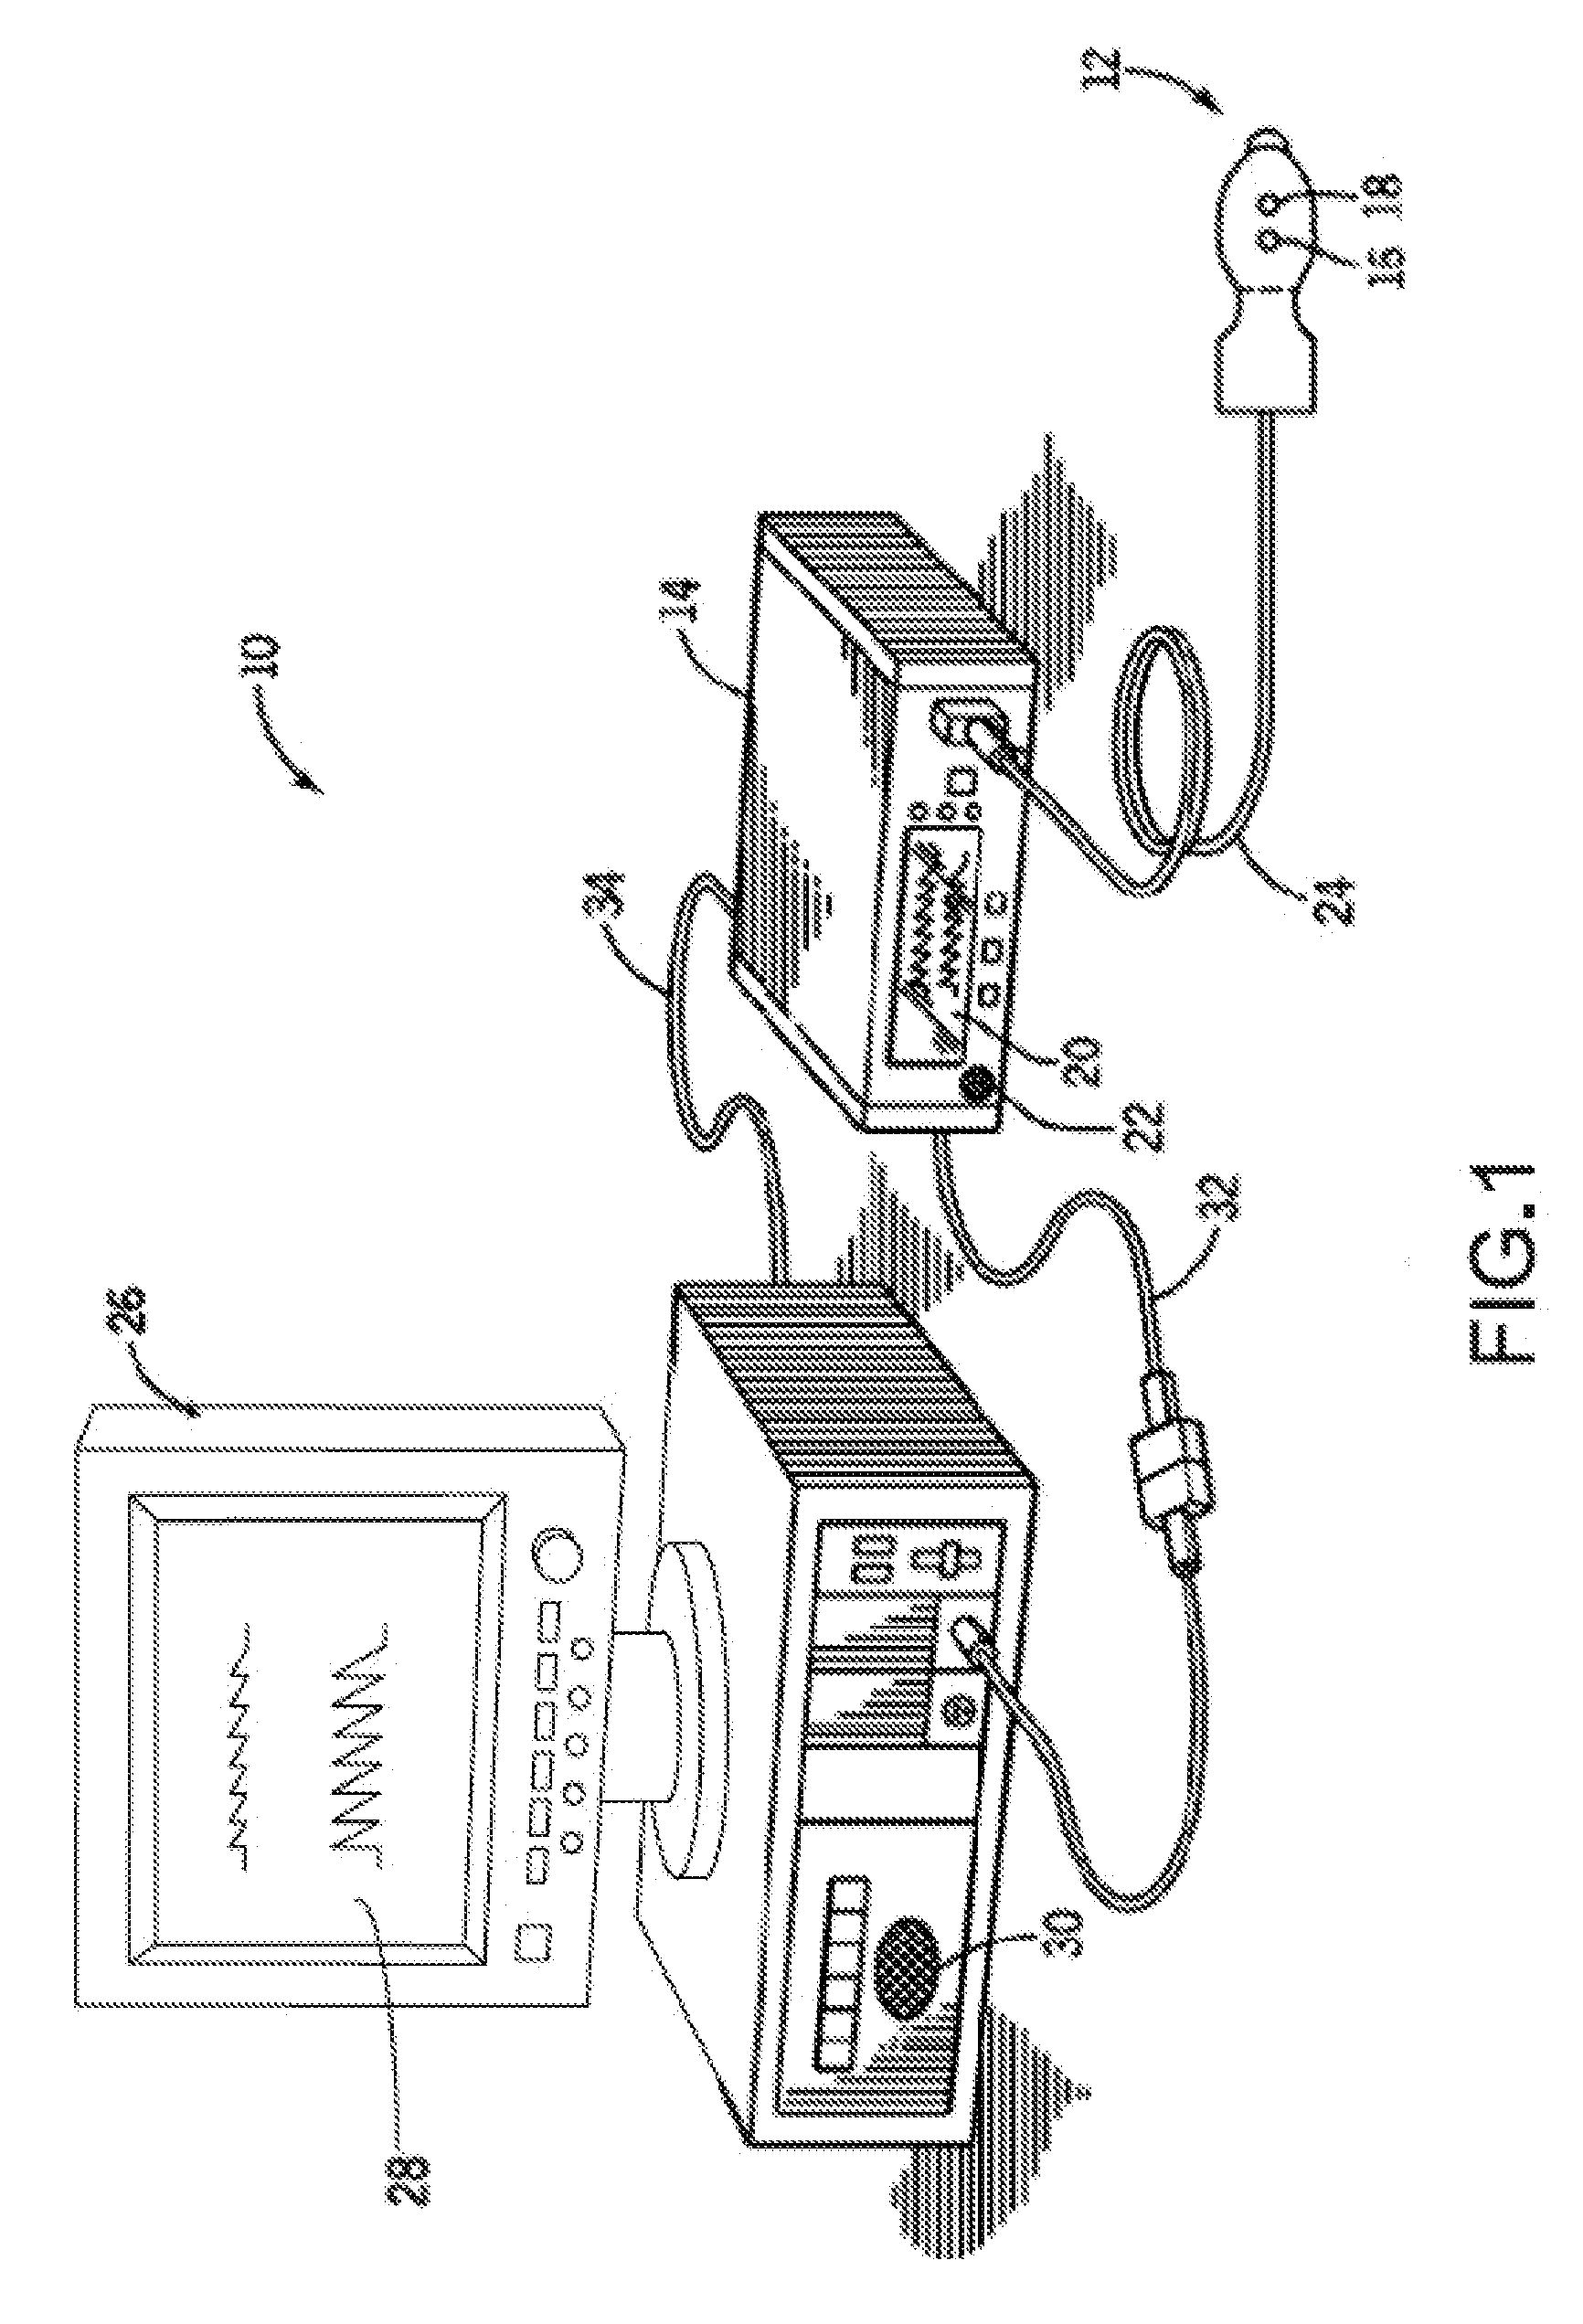 Systems and methods for detecting effort events